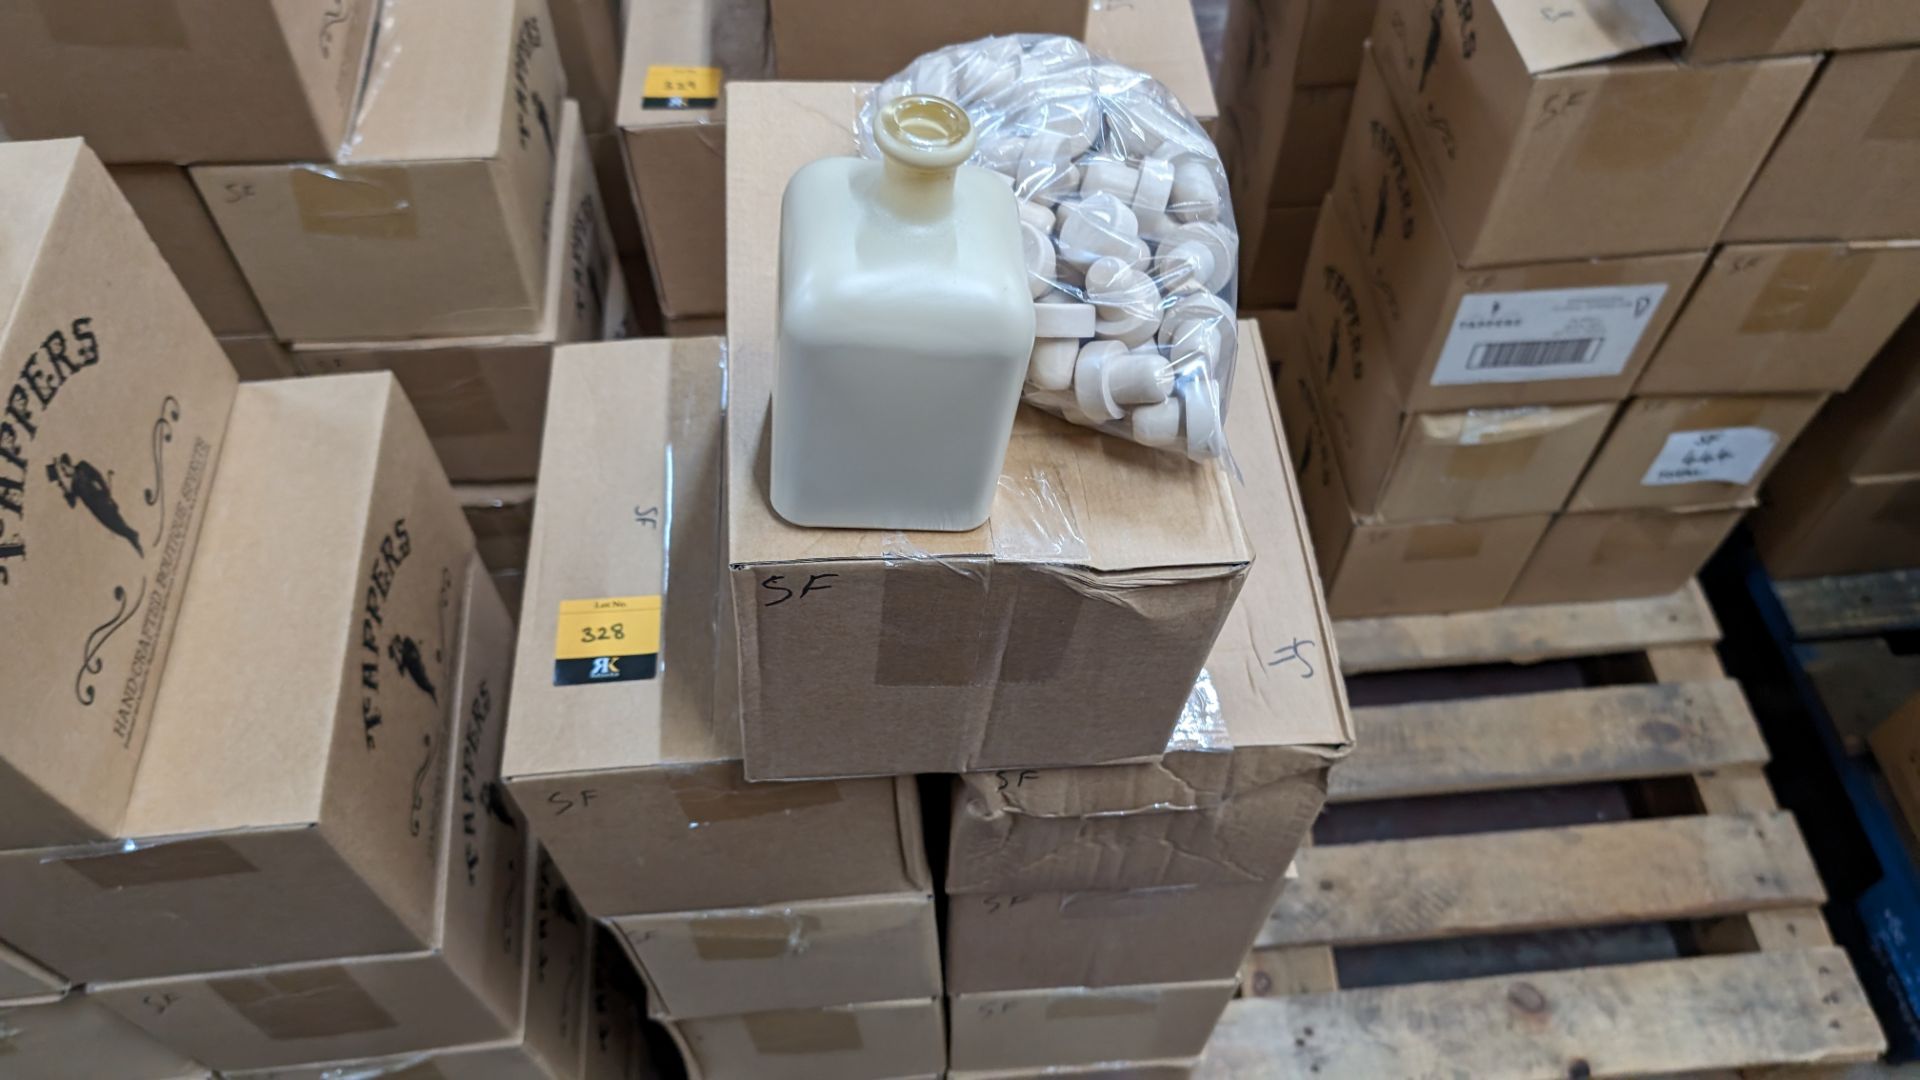 54 off 50cl/500ml professionally painted cream glass bottles, each including a stopper. The bottles